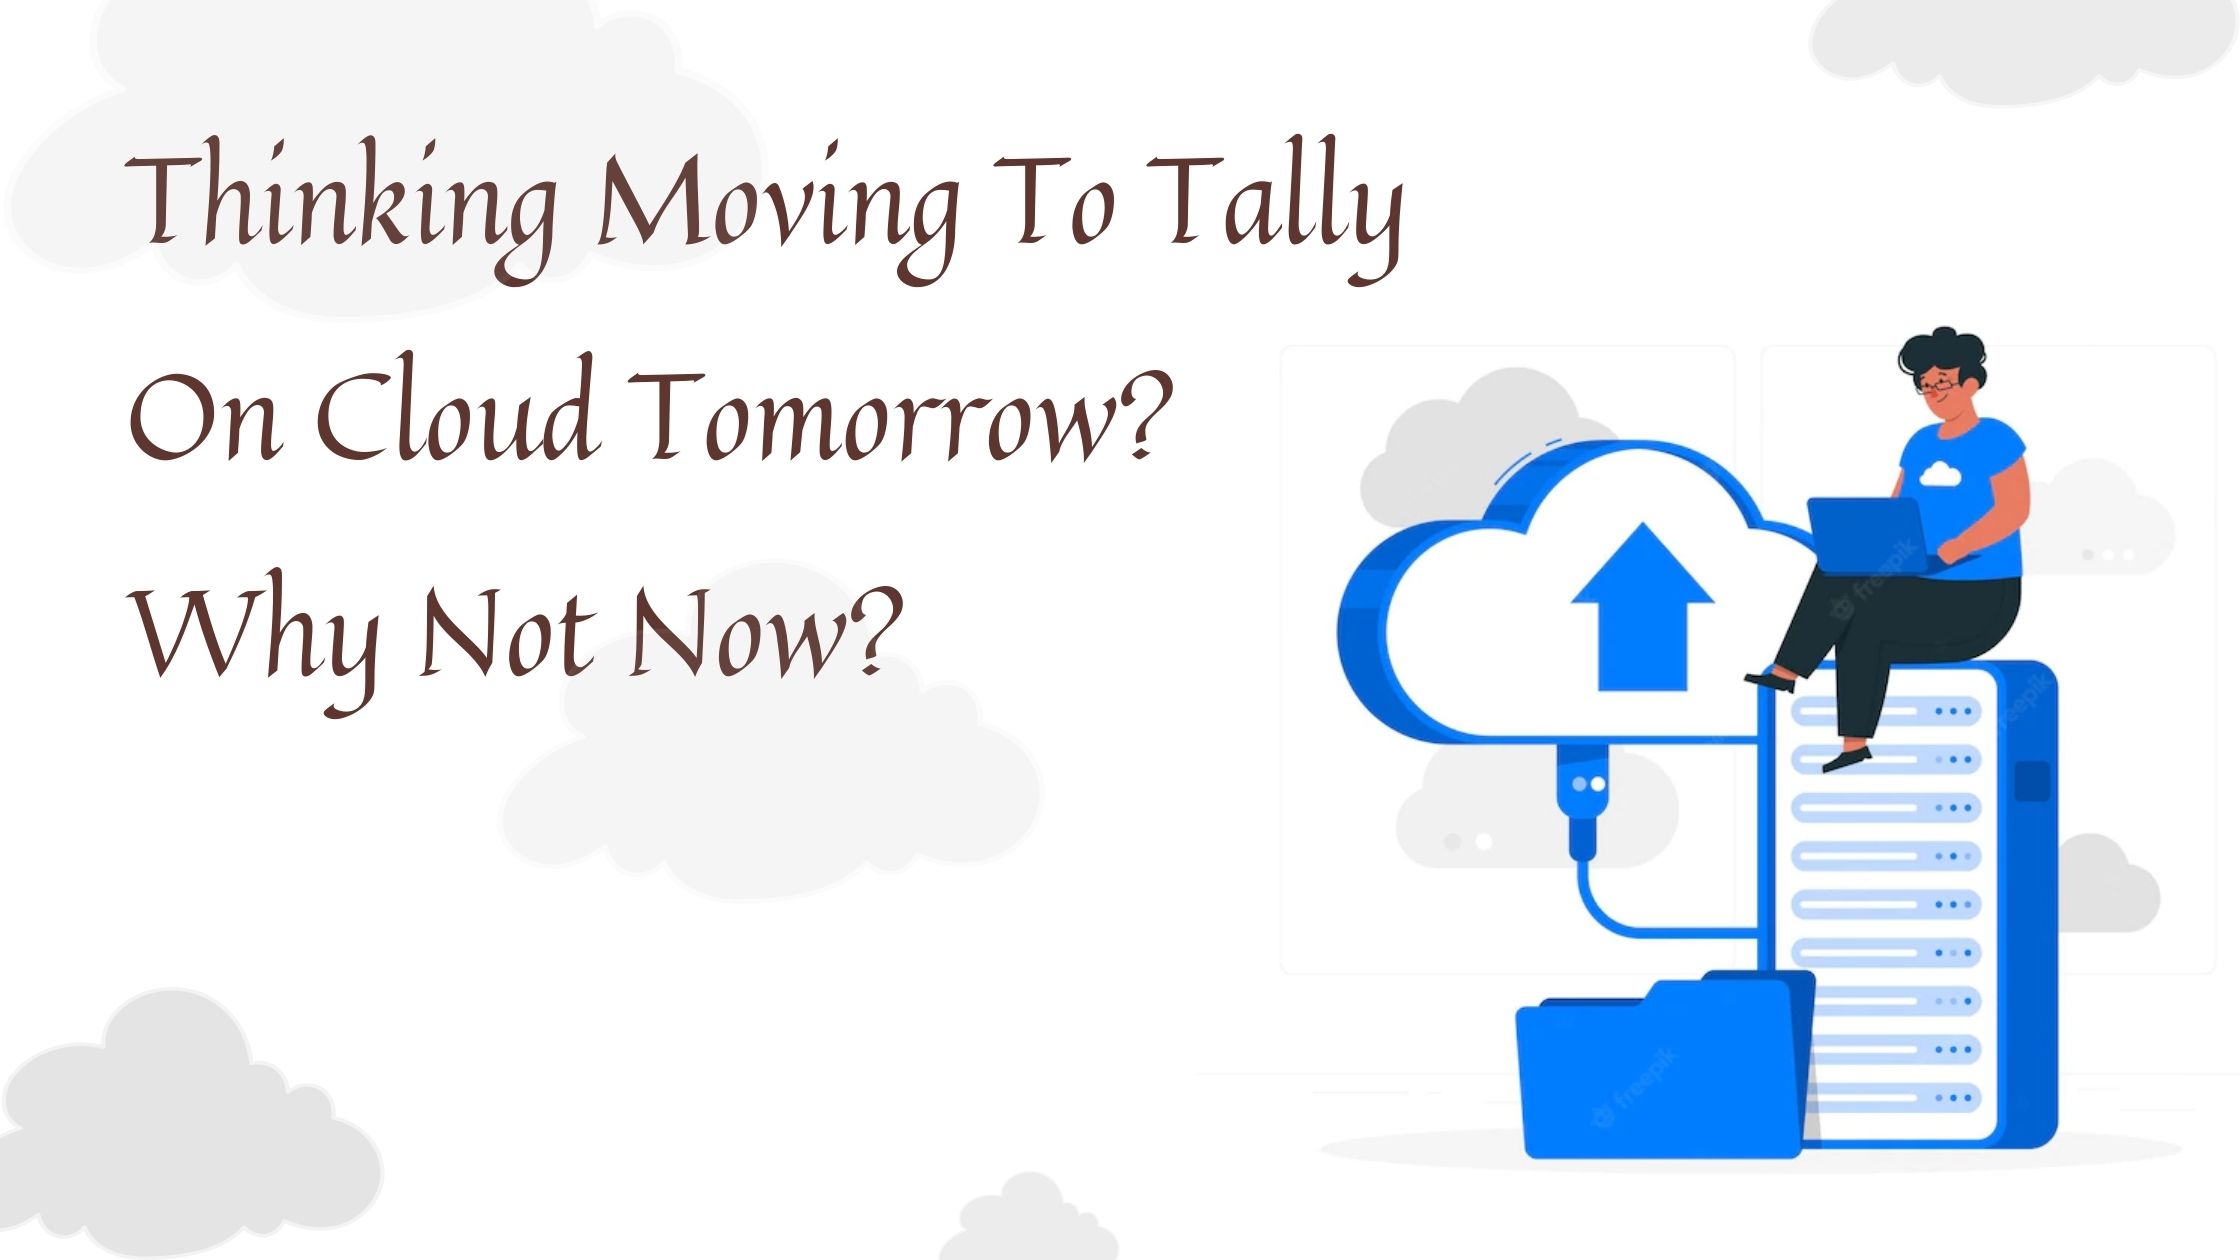 Move to tally on cloud